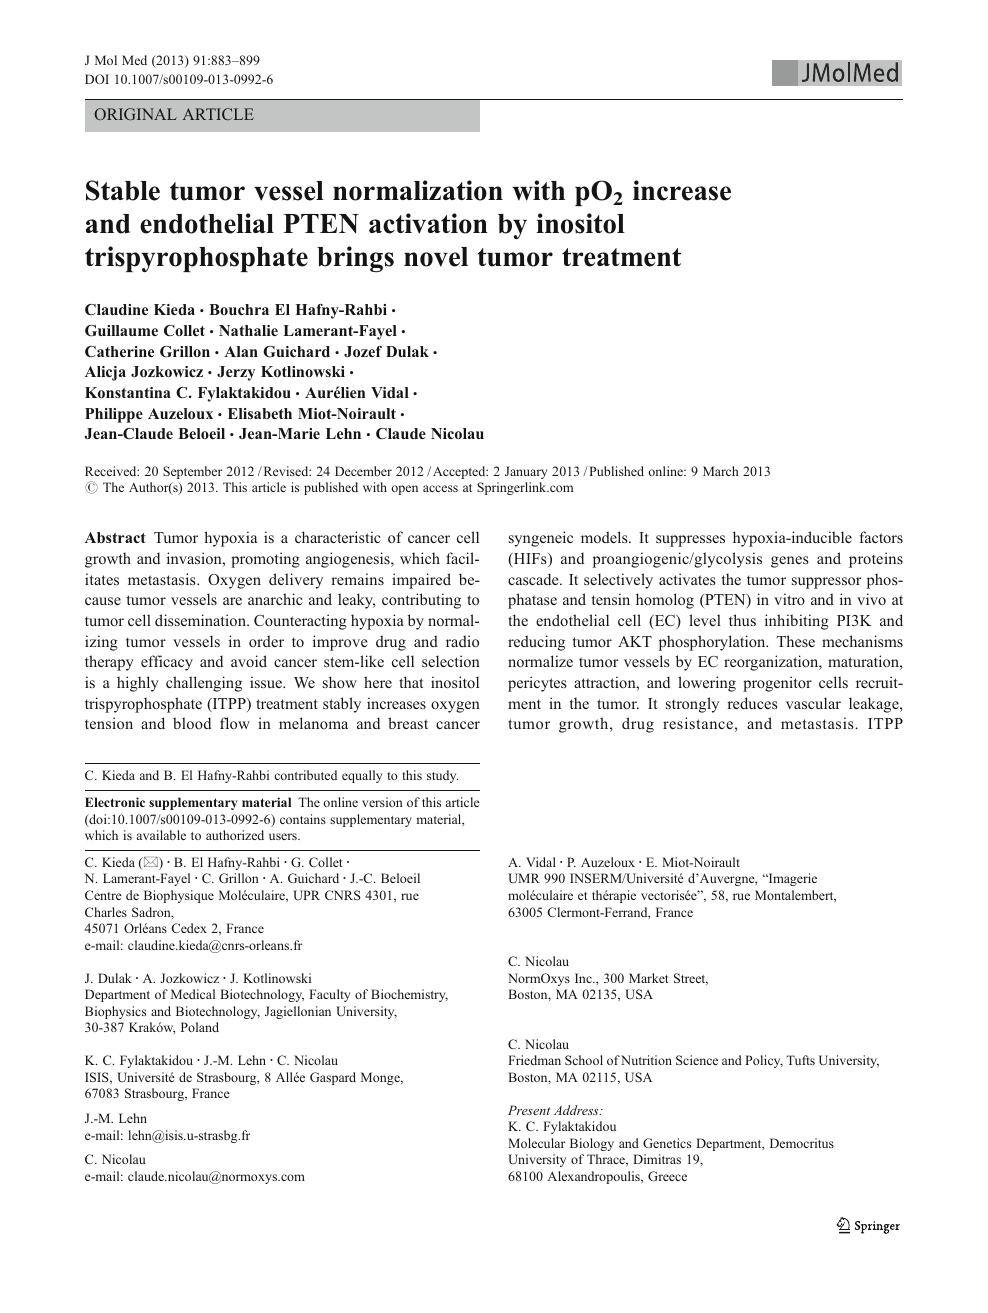 Stable Tumor Vessel Normalization With Po2 Increase And Endothelial Pten Activation By Inositol Trispyrophosphate Brings Novel Tumor Treatment Topic Of Research Paper In Biological Sciences Download Scholarly Article Pdf And Read